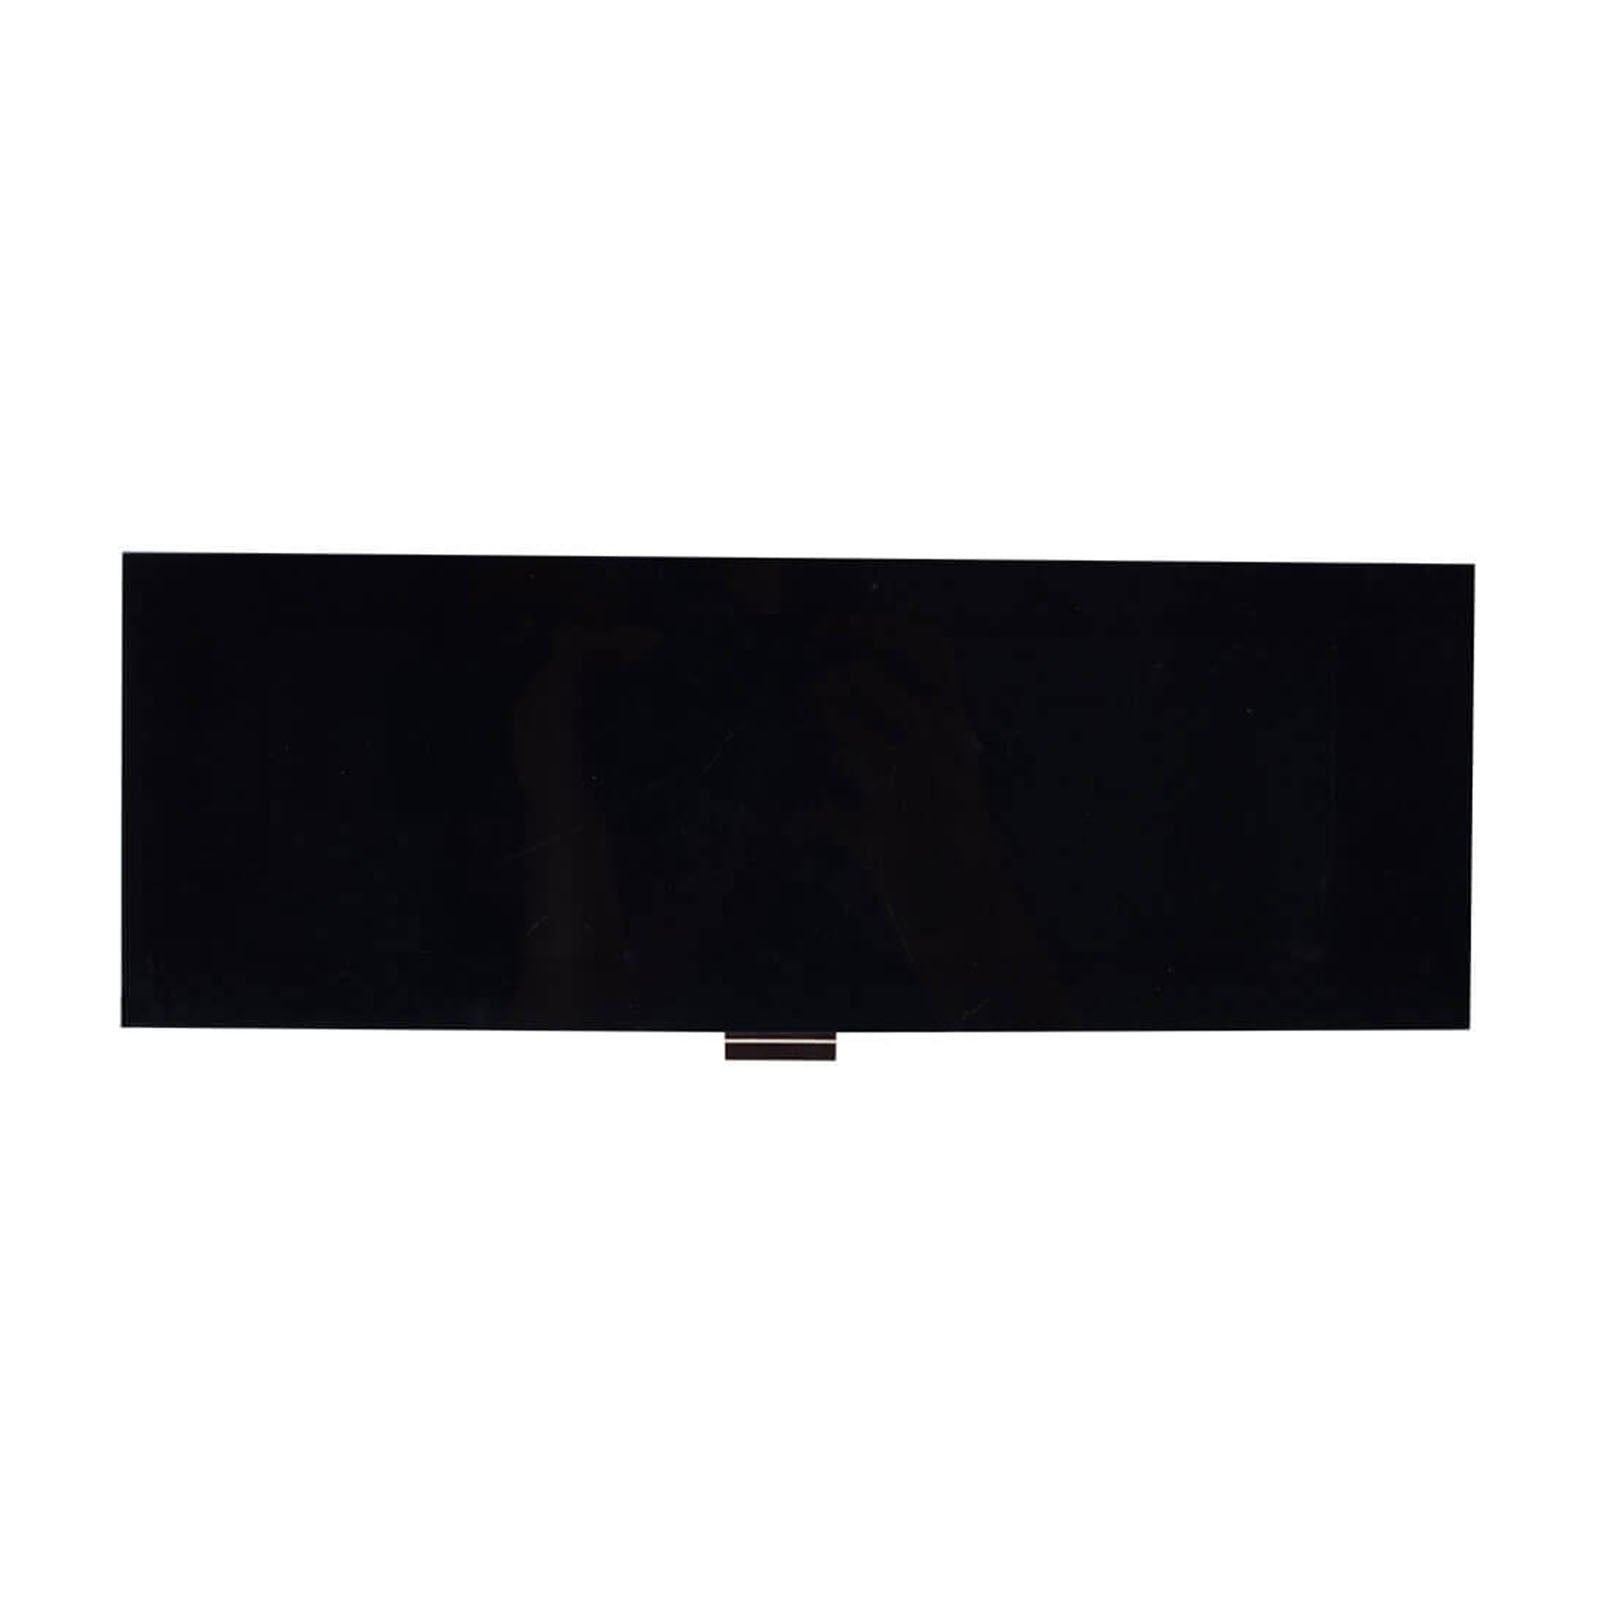 DisplayModule 8.0" IPS 1600x480 BAR Type Display Panel With Capacitive Touch - LVDS